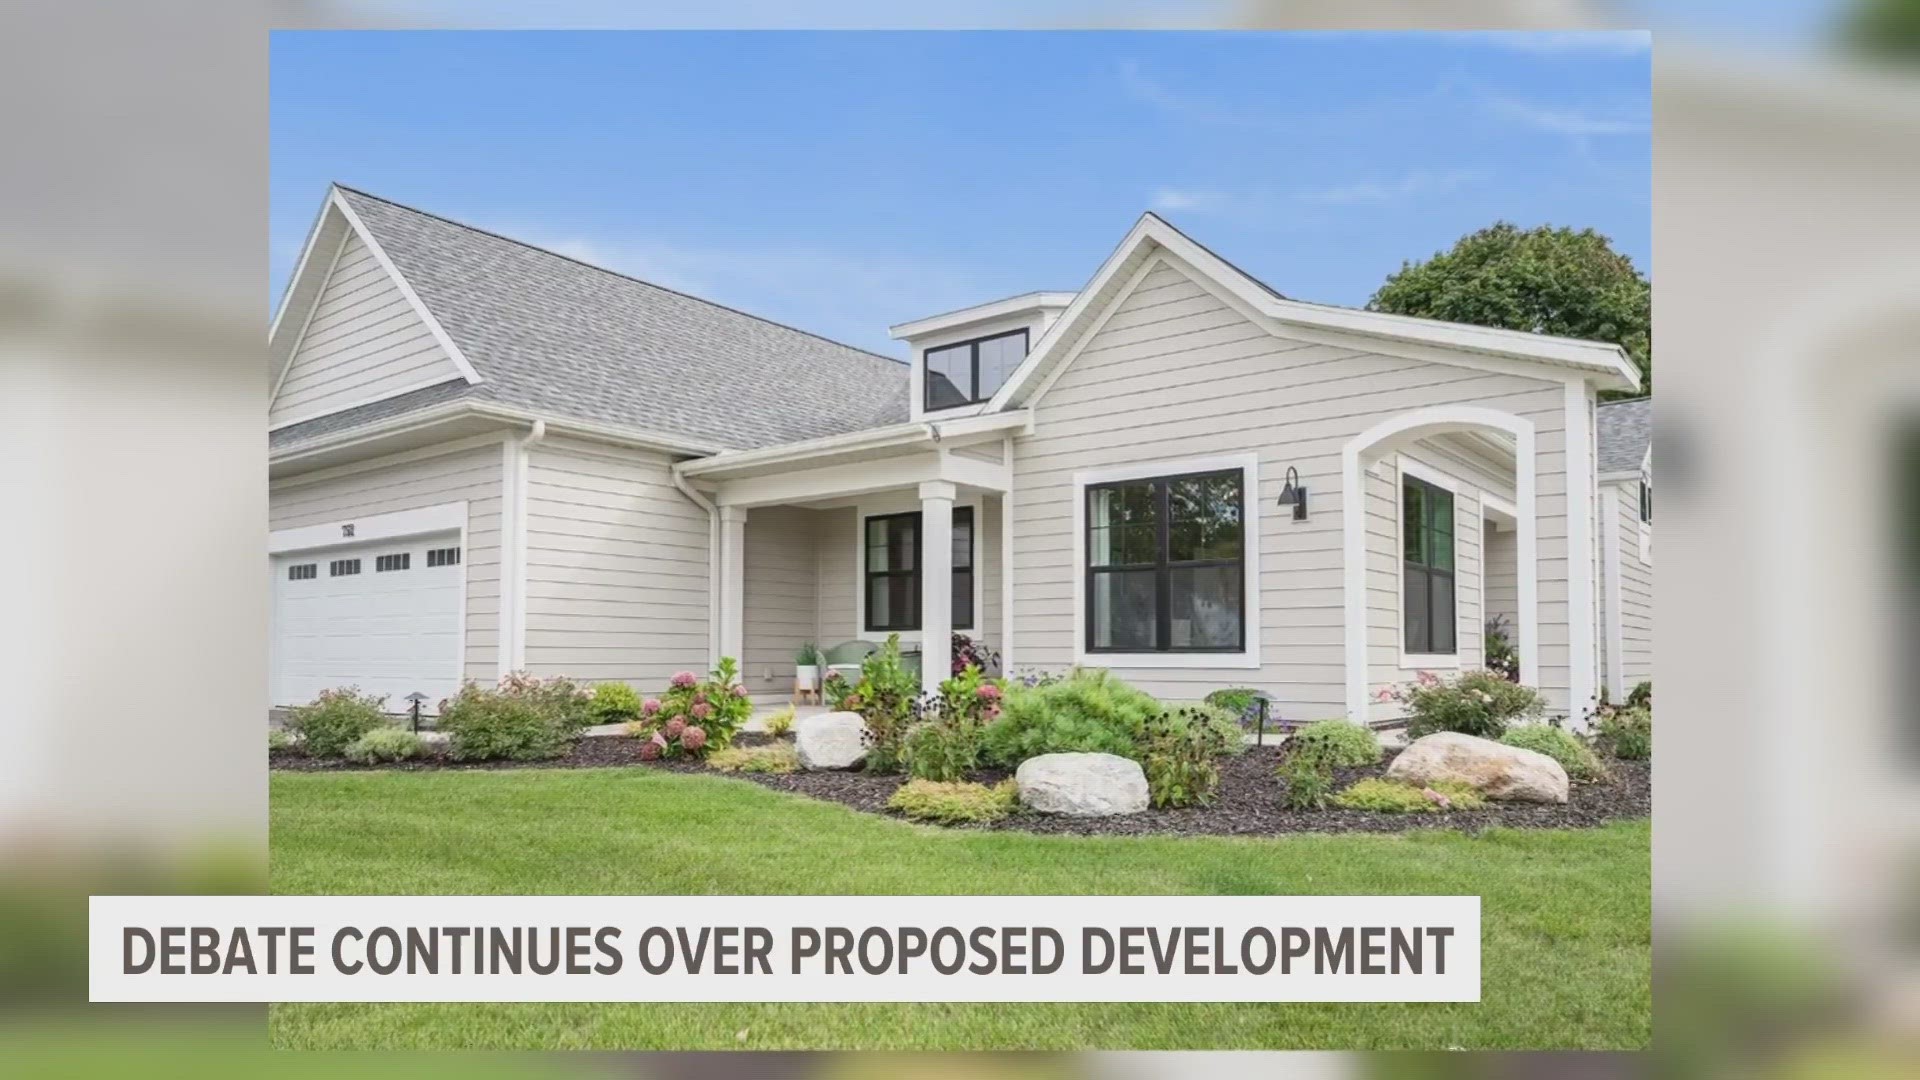 The developer has proposed 40 condominium units in Grand Rapids Township. Neighbors say the property in question is not suitable enough to house the community.